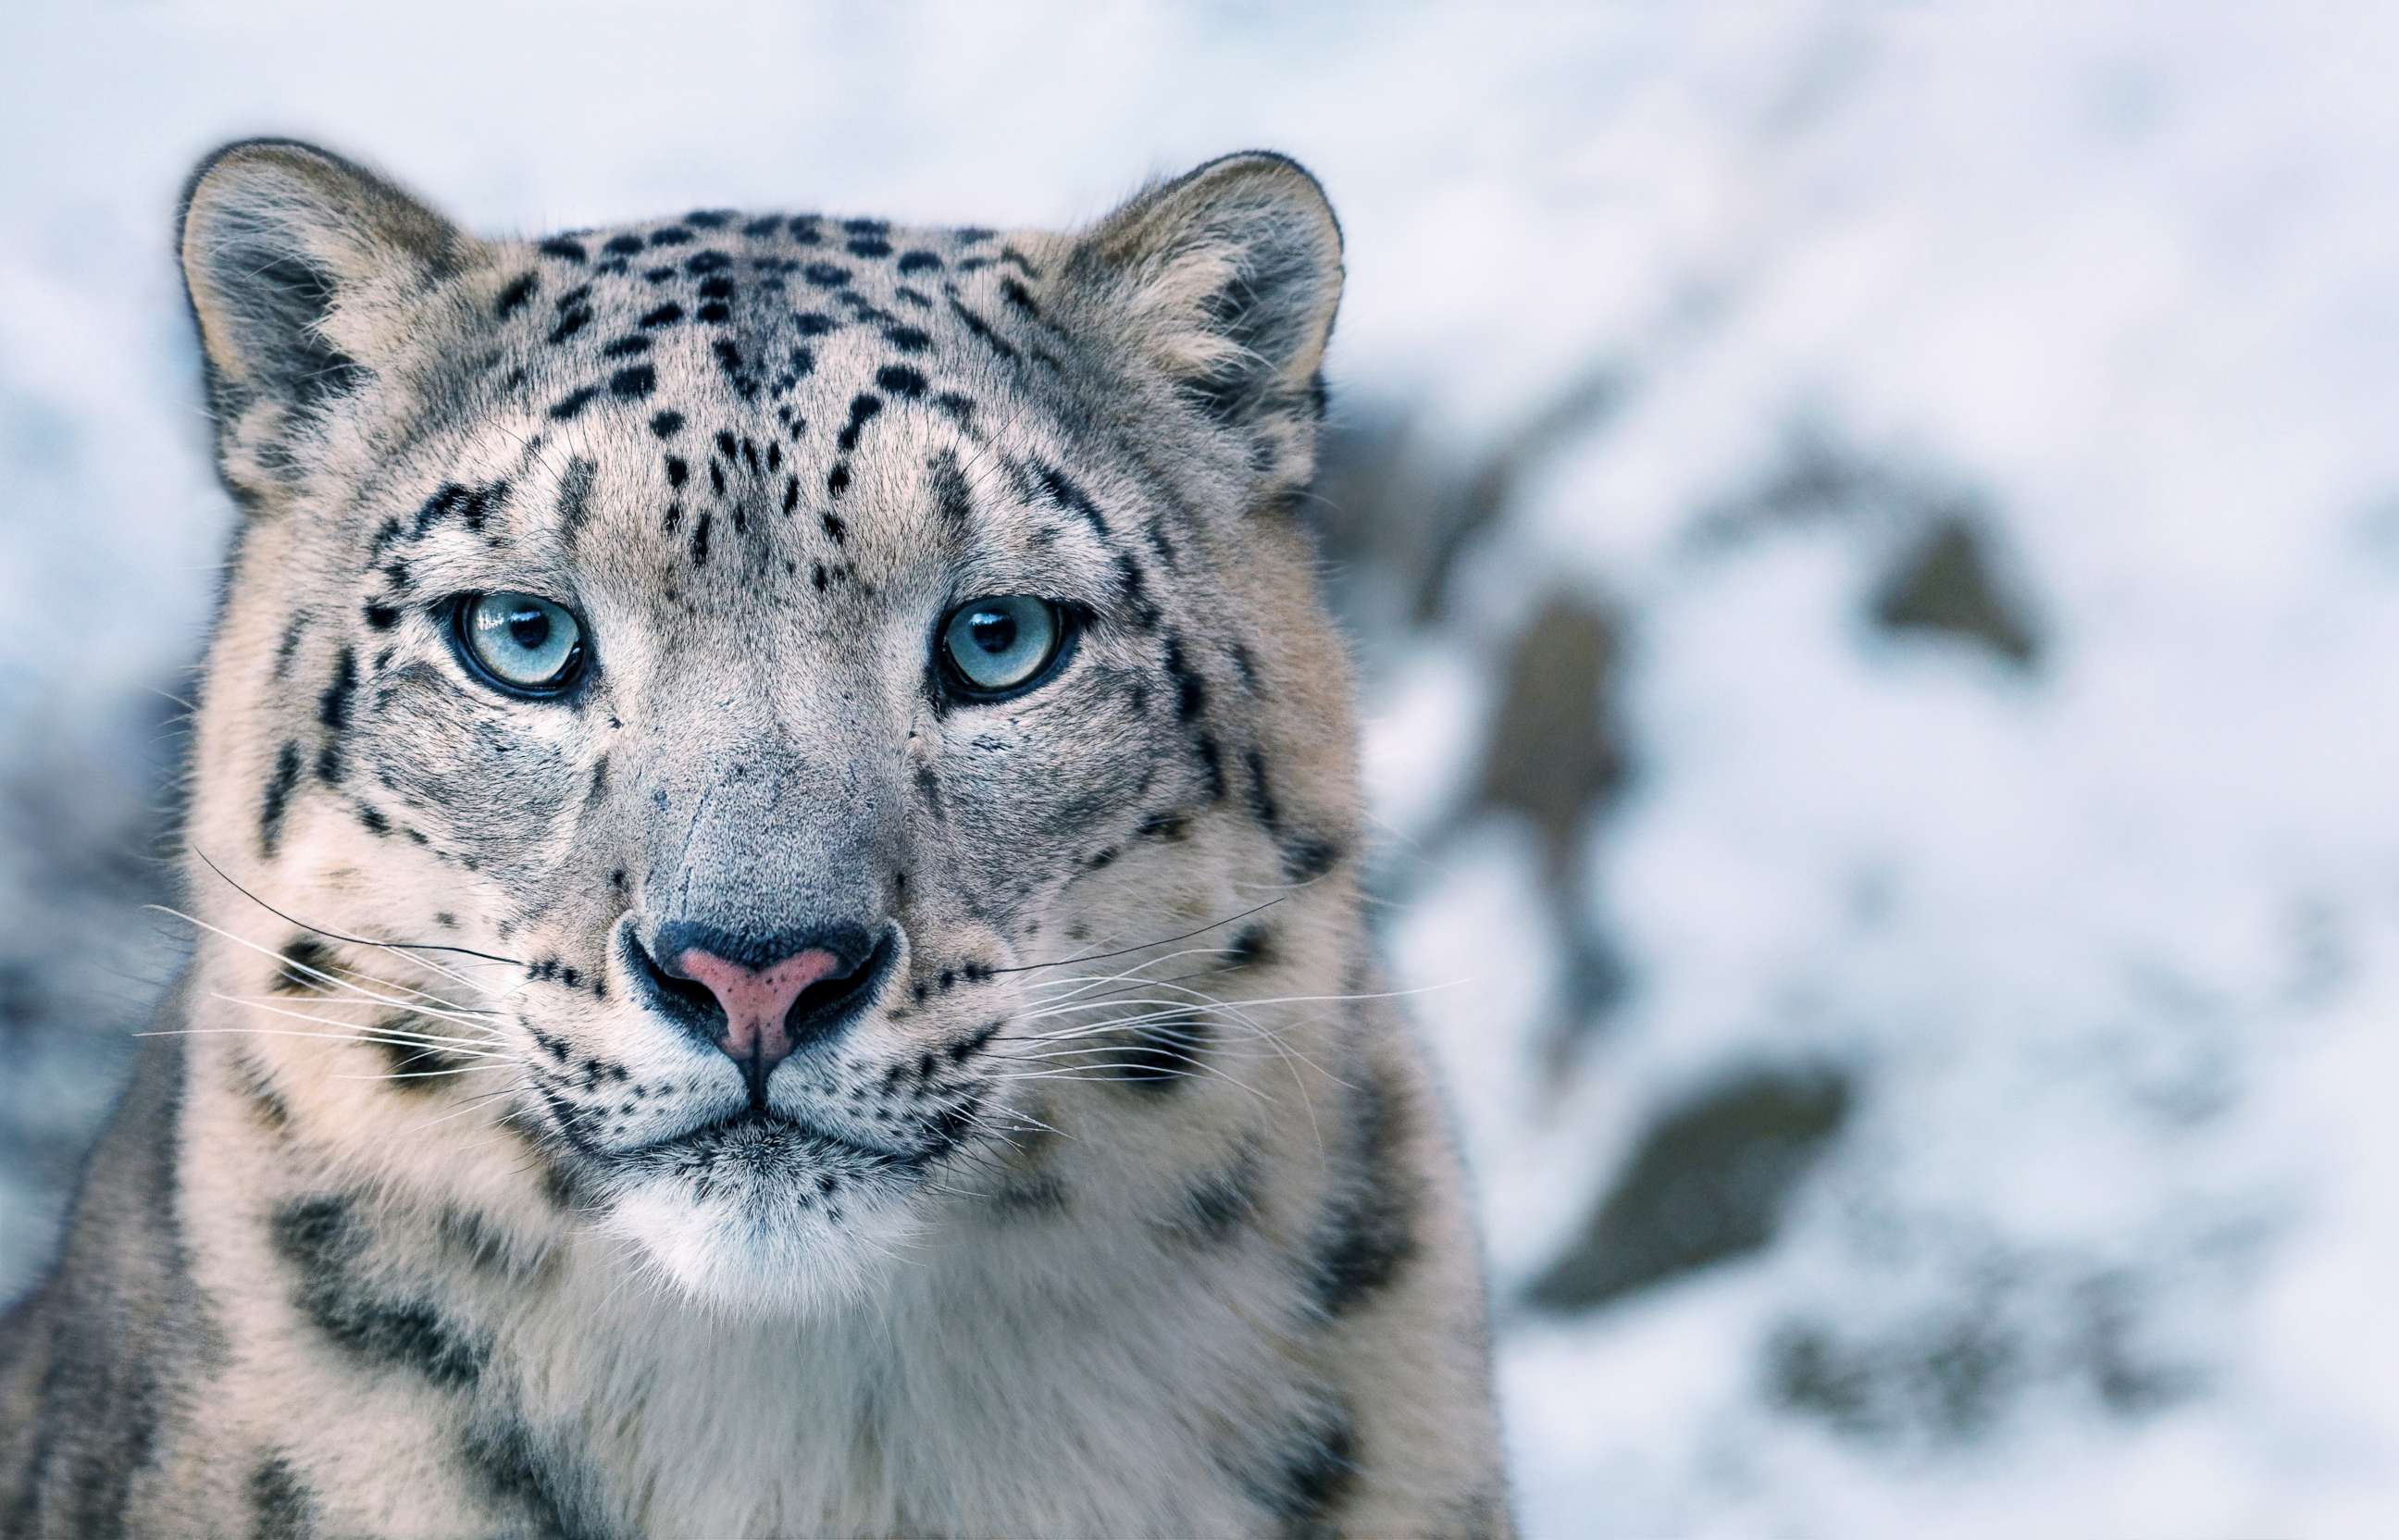 IUCN Snow Leopard Threat Level Endangered Picture 'Endangered